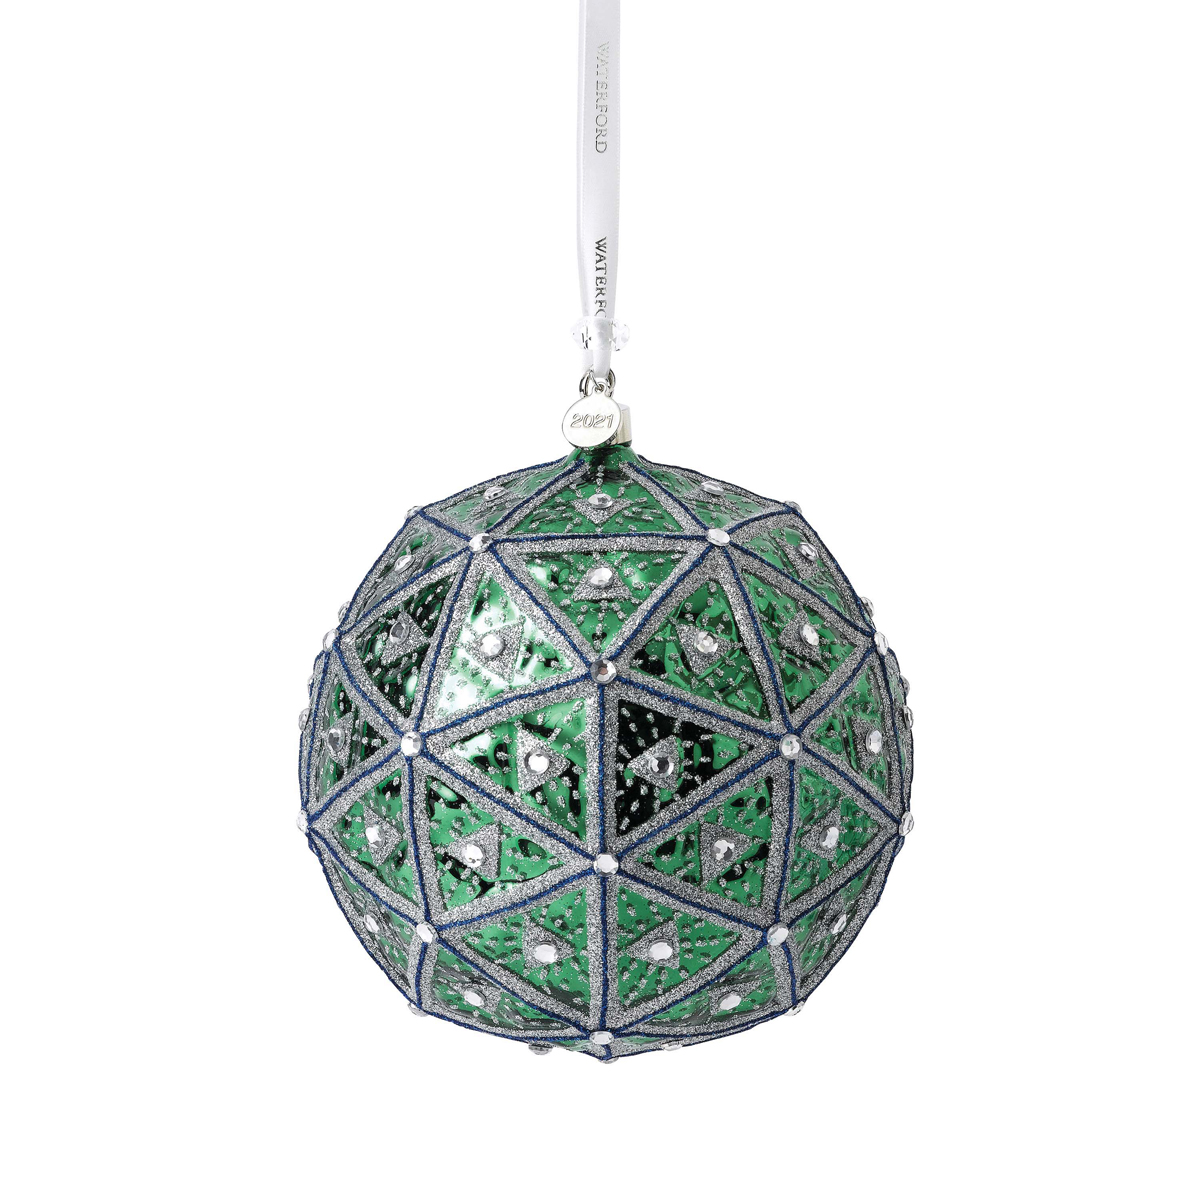 Waterford 2021 Times Square Masterpiece Ball Ornament